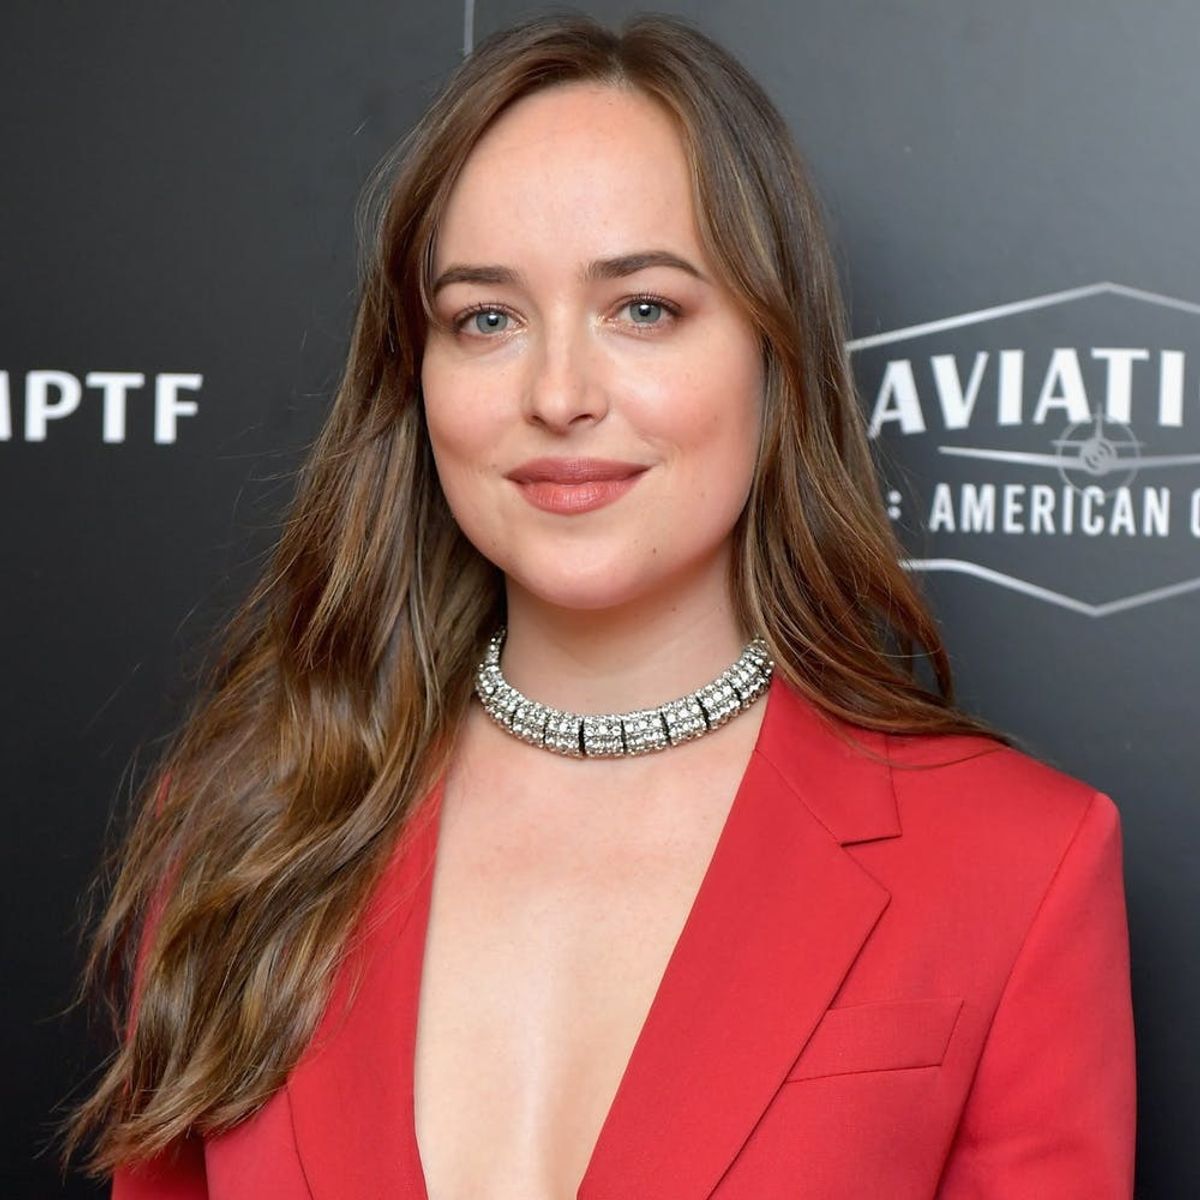 Dakota Johnson Reveals the ‘Very Scary’ Part of Starring in the ‘Fifty Shades’ Franchise